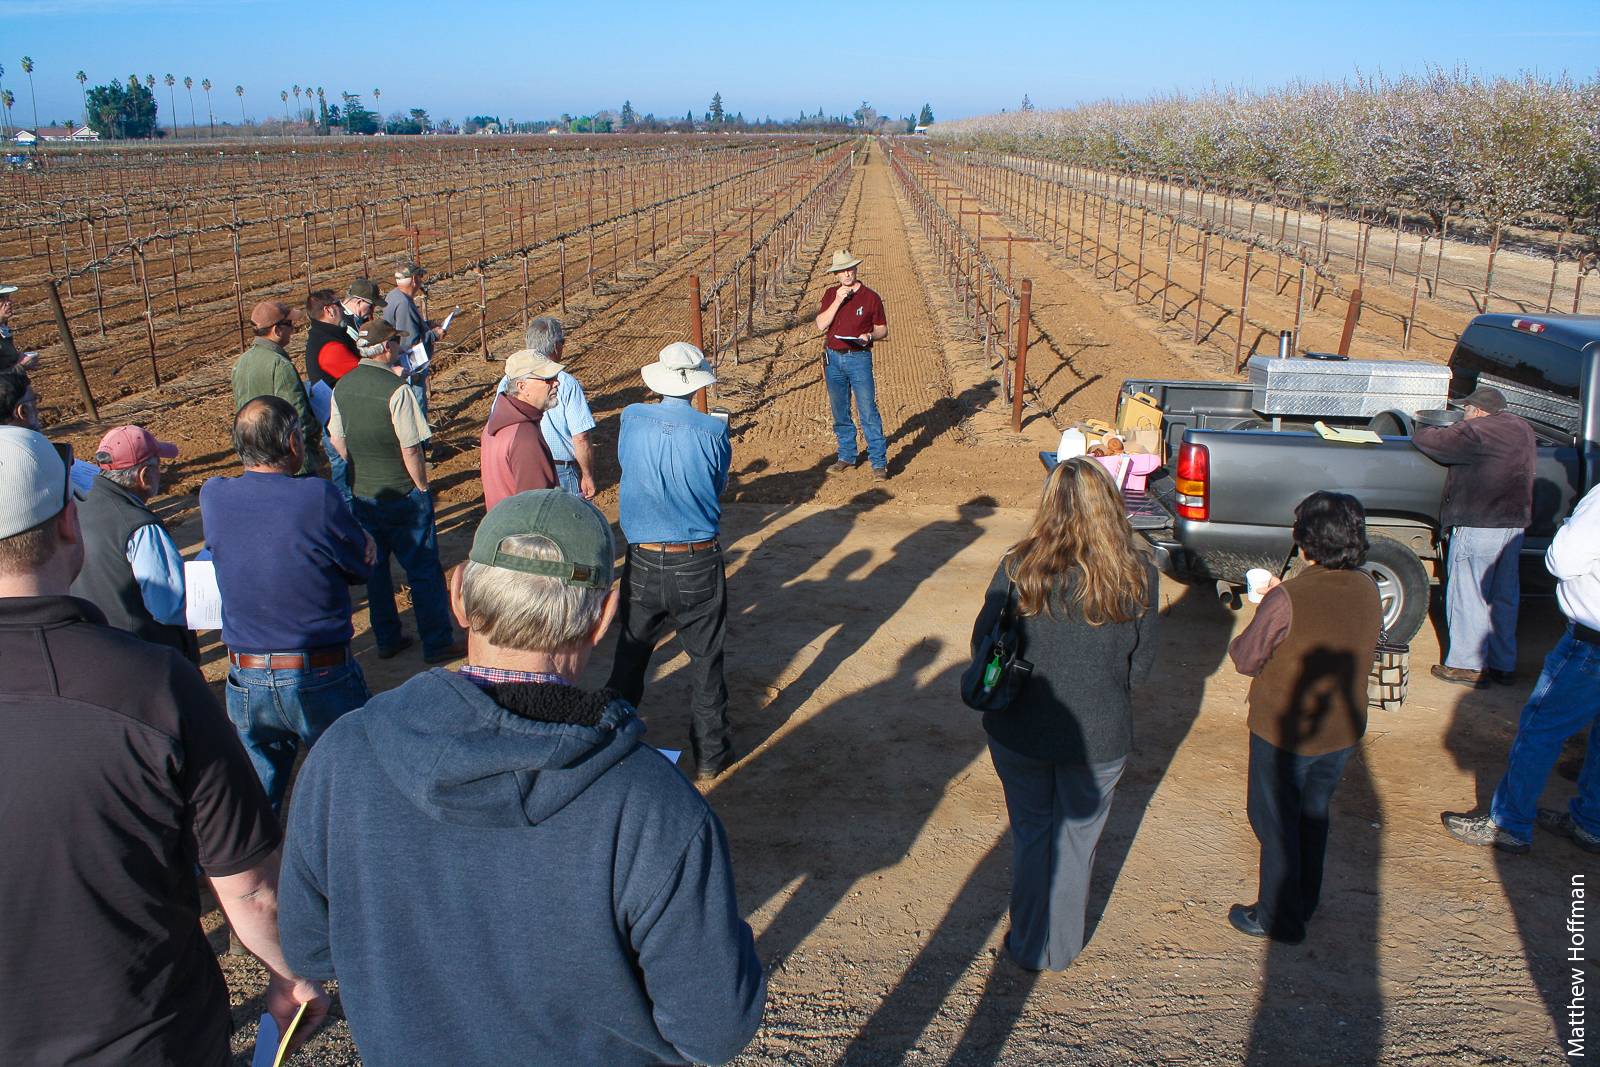 Lodi wine grape growers gather to learn about mechanical pruning equipment and trellising systems from UCCE San Joaquin County farm advisor Paul Verdegaal and fellow growers with experience on the topic. Field meetings cultivate social learning passively. Network-smart extension would integrate facilitation techniques to actively engage growers in knowledge-sharing activities with their peers.